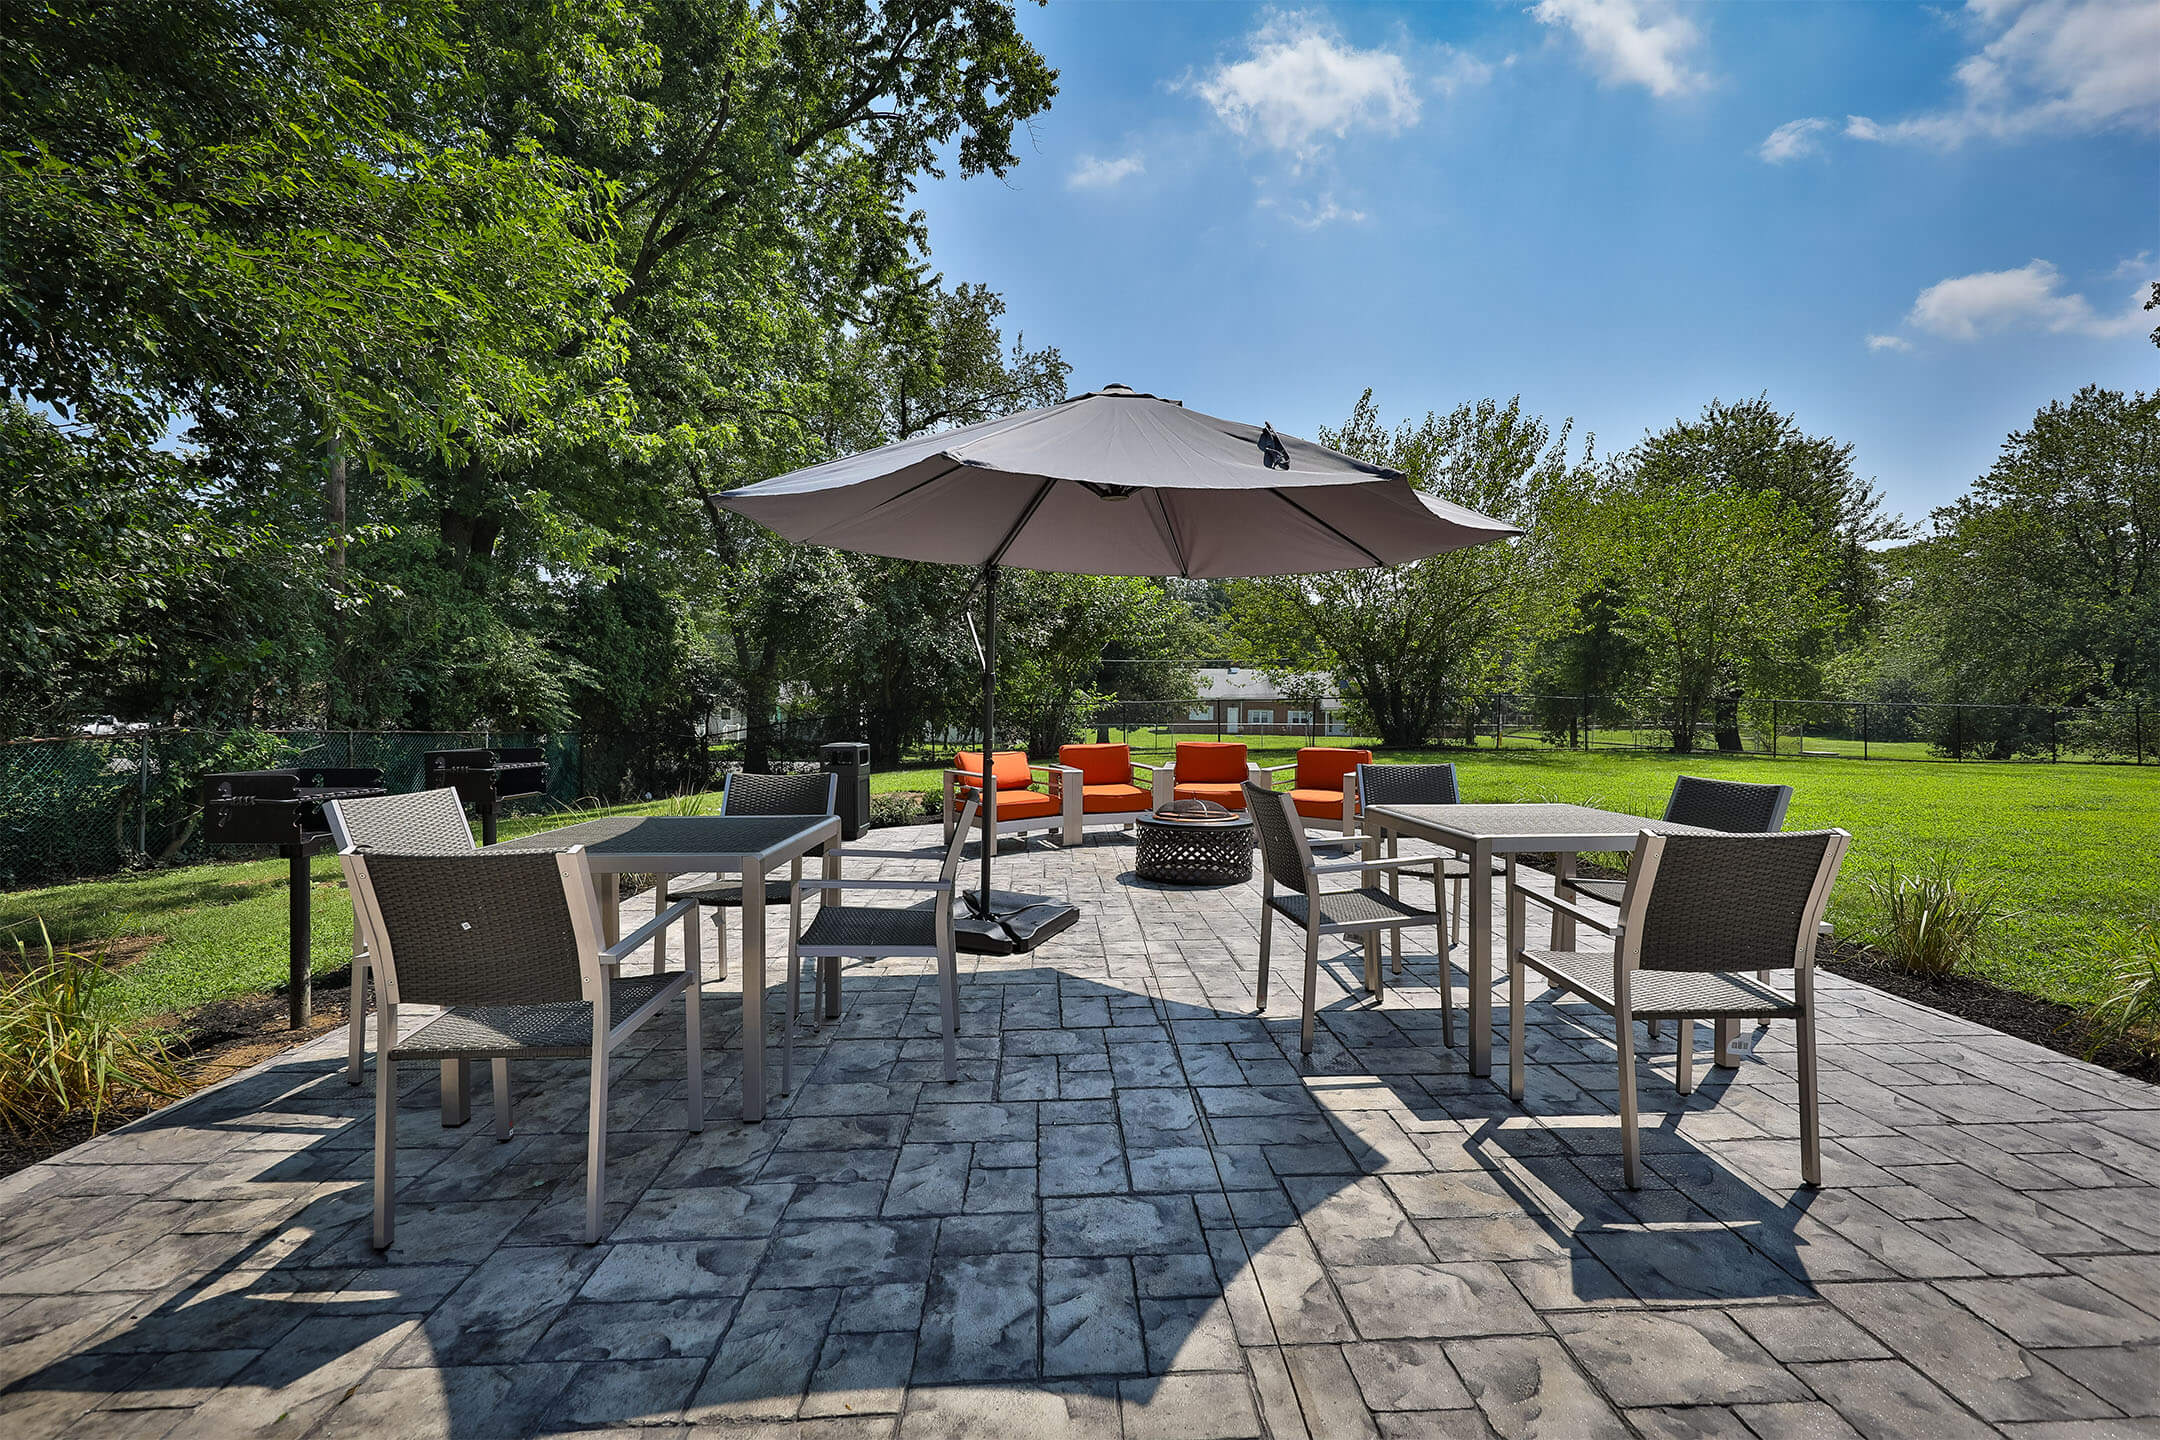 Outdoor seating with umbrella at Parc at Cherry Hill, Cherry Hill, New Jersey